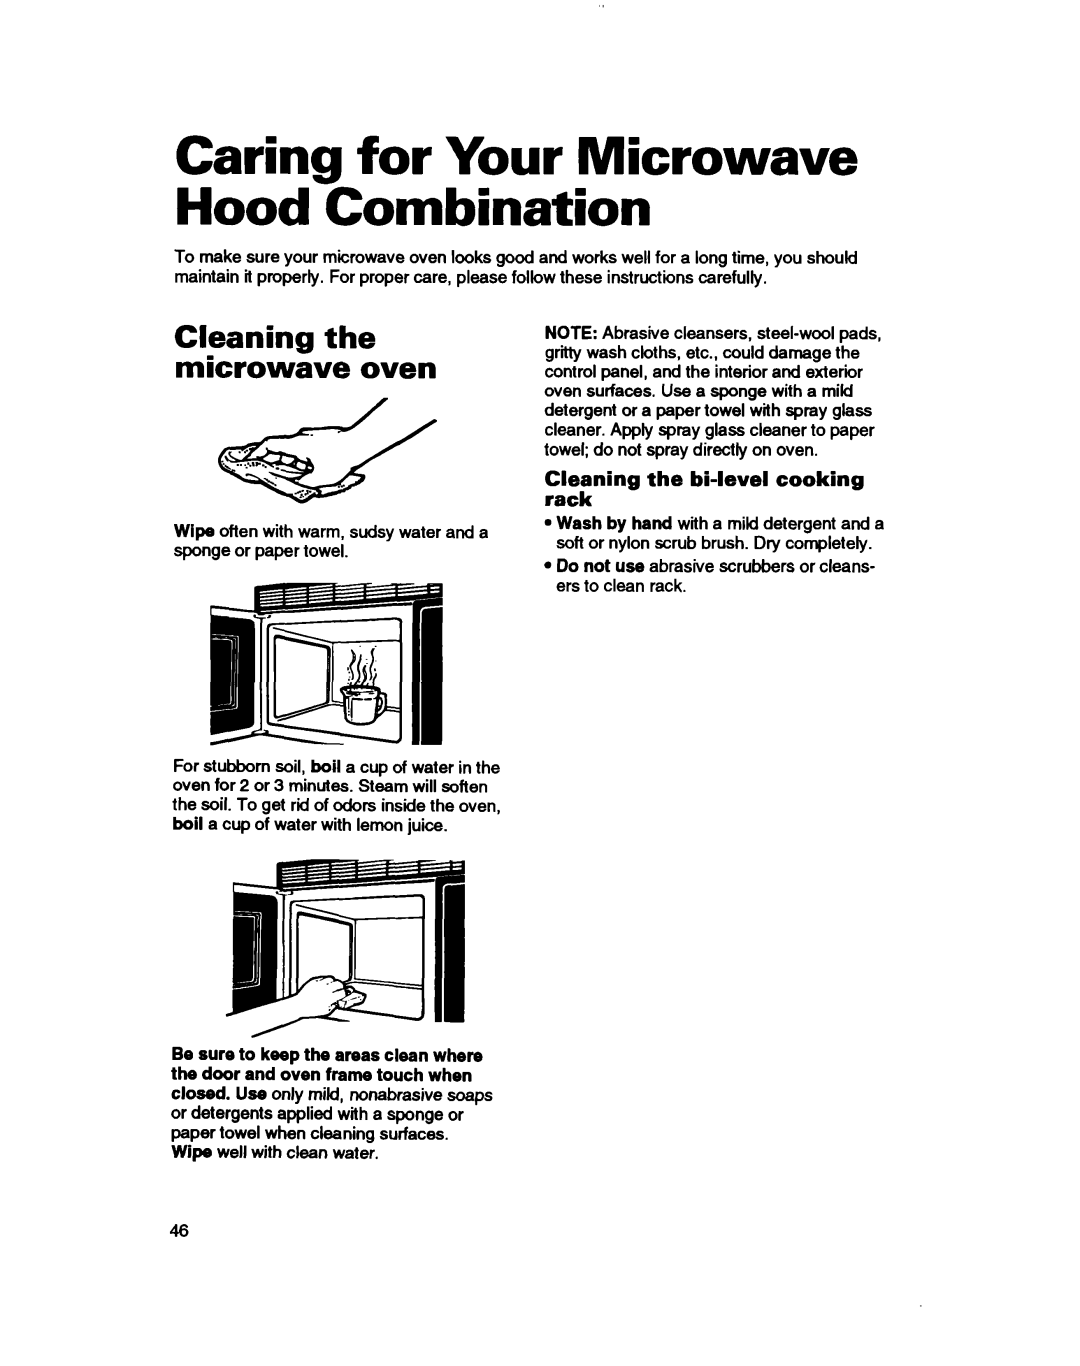 Whirlpool MH7110XB warranty Caring for Your Microwave Hood Combination, CAE;ning the bi-levelcooking 